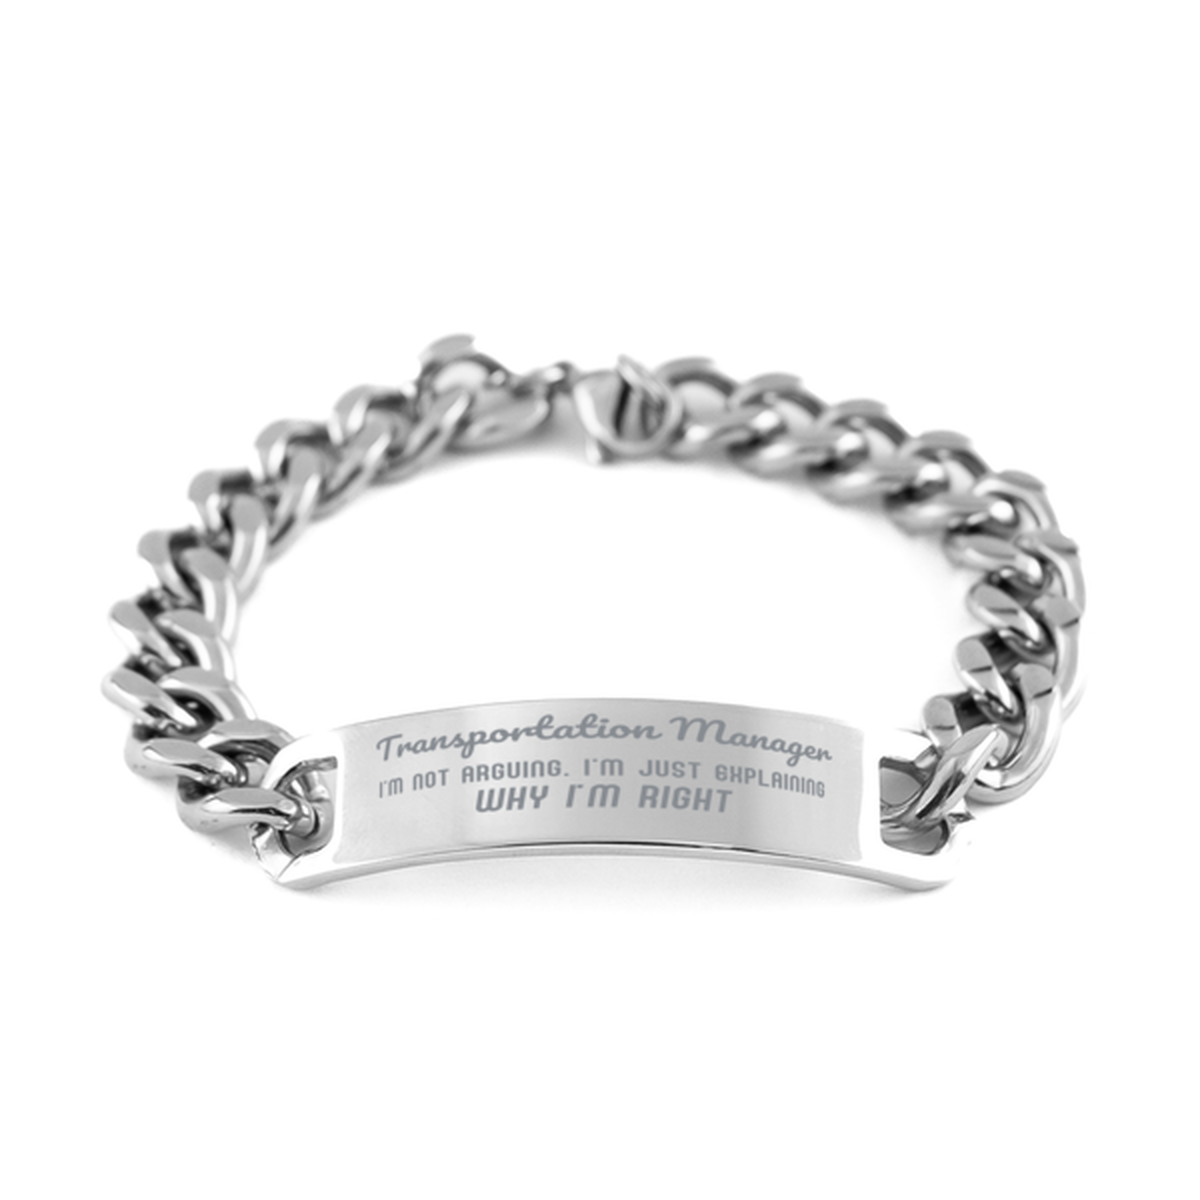 Transportation Manager I'm not Arguing. I'm Just Explaining Why I'm RIGHT Cuban Chain Stainless Steel Bracelet, Graduation Birthday Christmas Transportation Manager Gifts For Transportation Manager Funny Saying Quote Present for Men Women Coworker